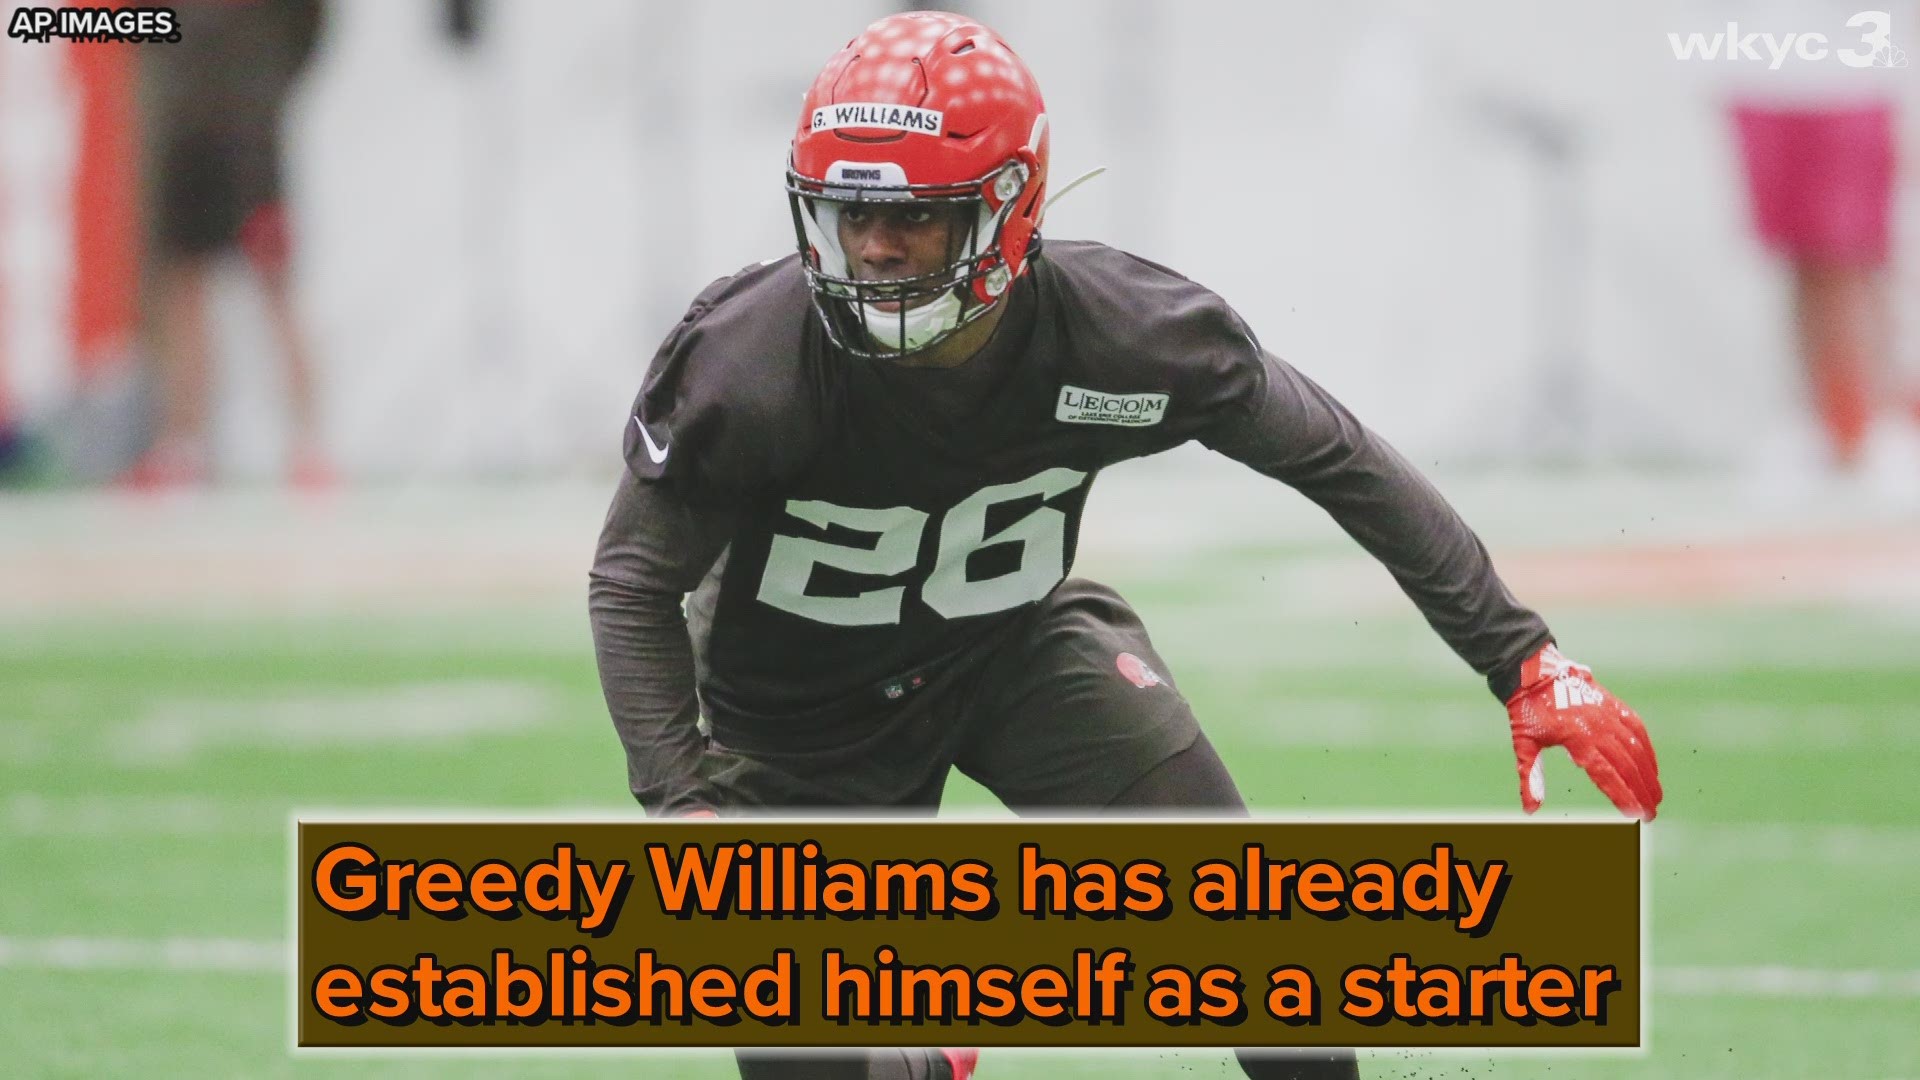 At Cleveland Browns minicamp this week, it was clear that rookie cornerback Greedy Williams has already earned a starting role with the team.